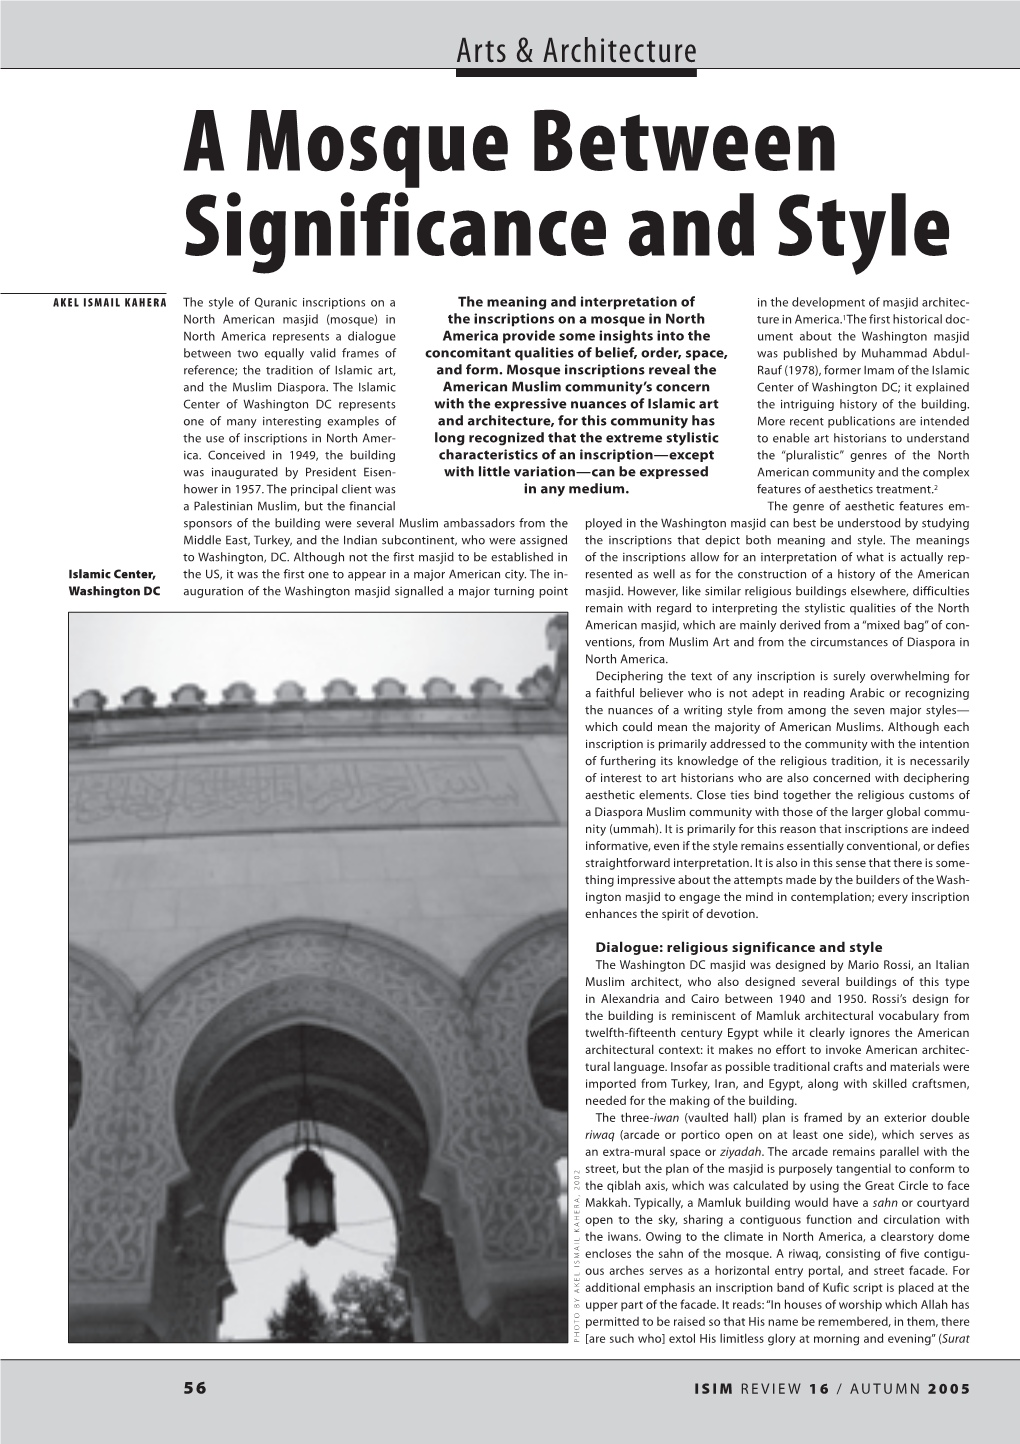 A Mosque Between Significance and Style